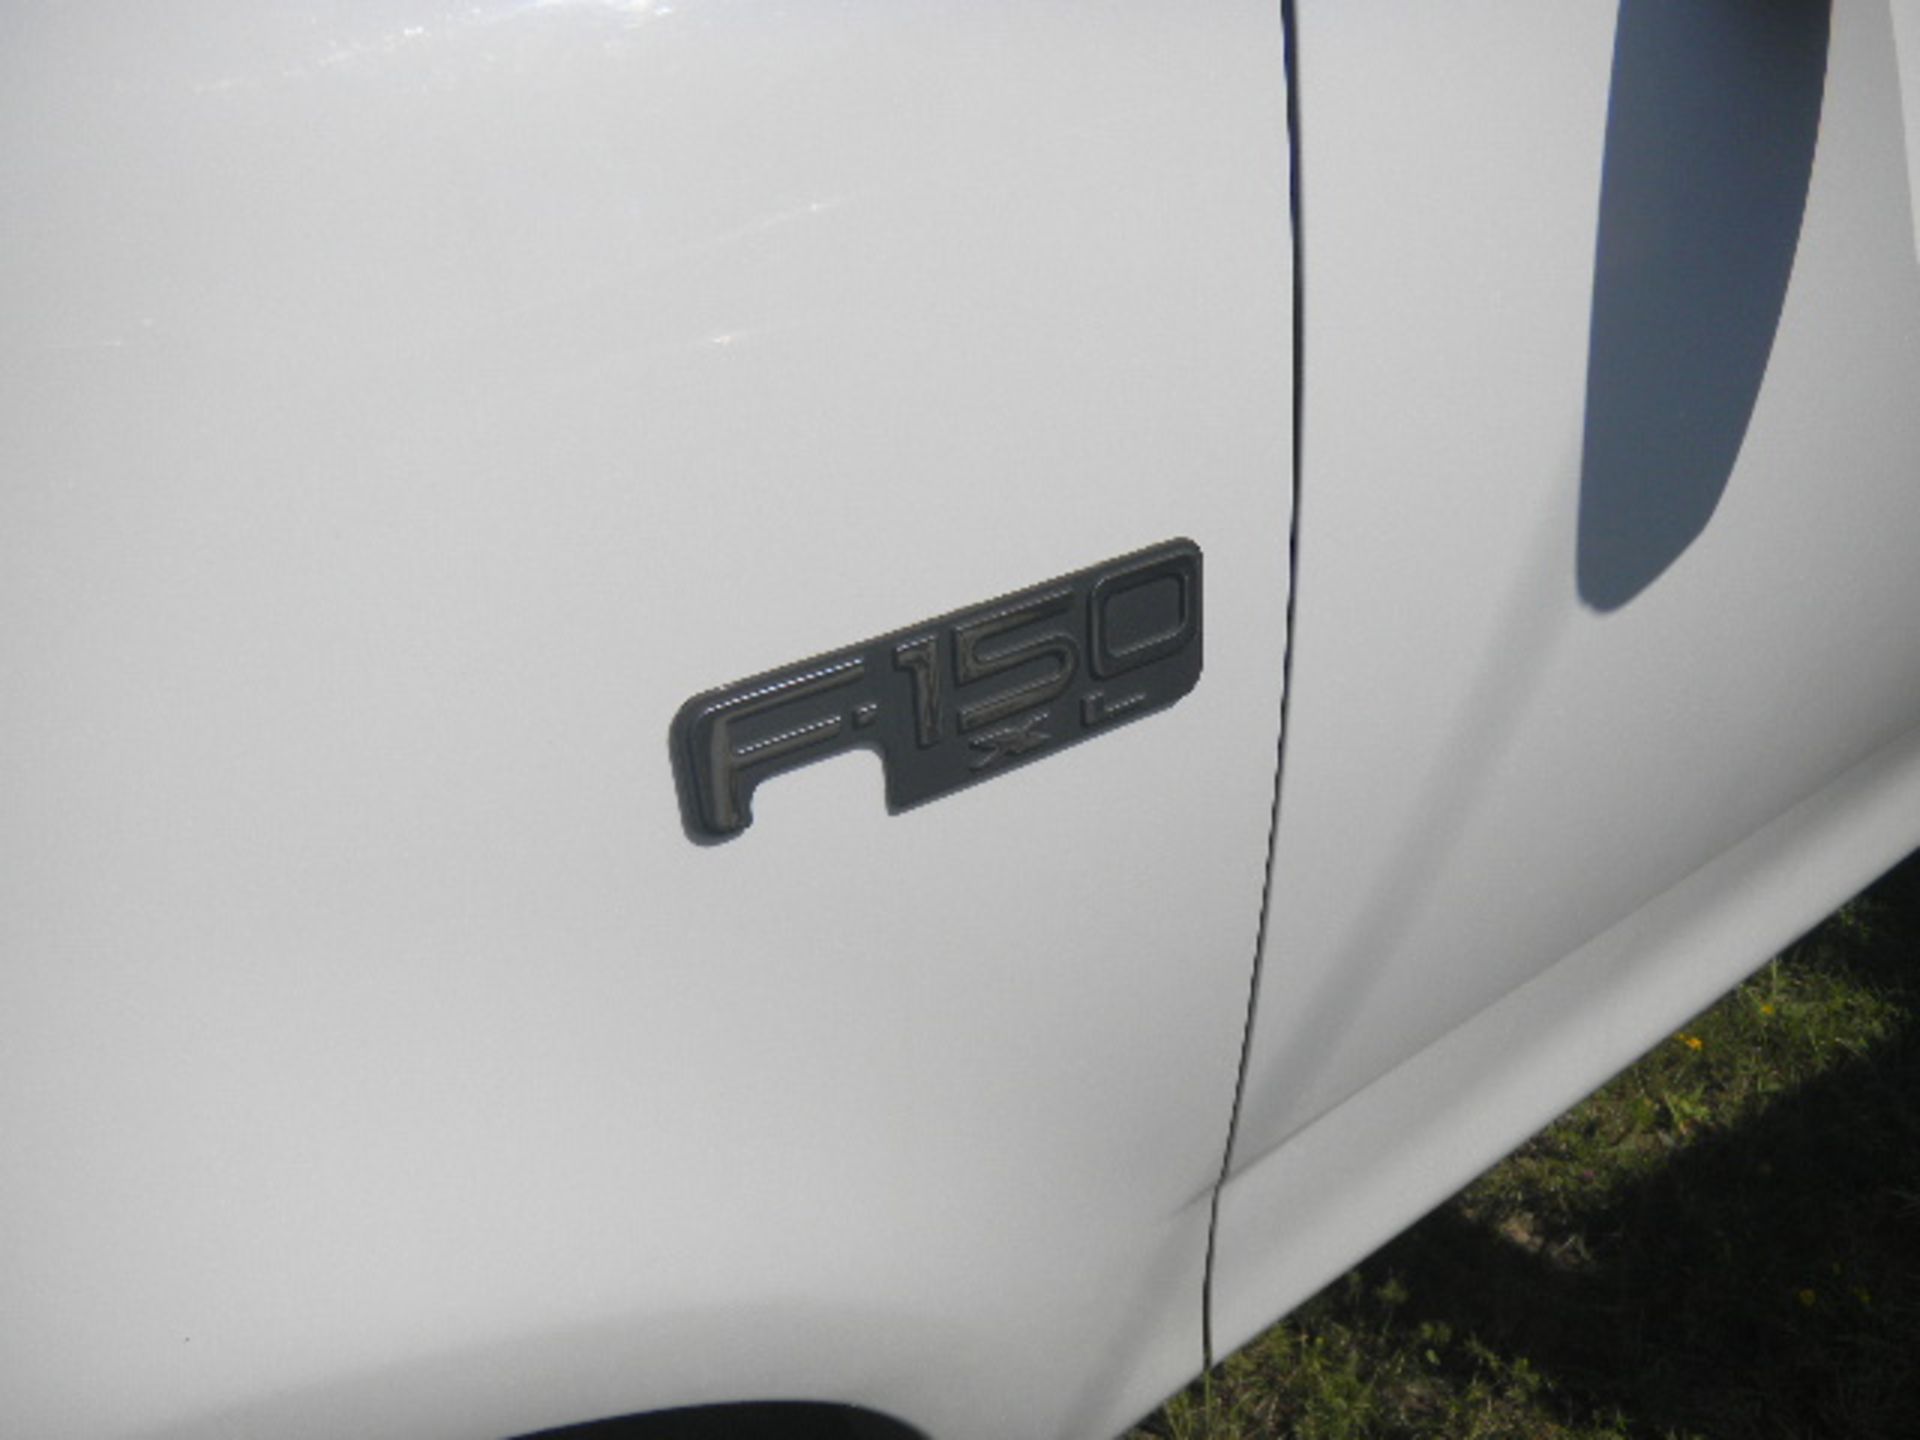 Ford F-150 XL White Pickup Truck - Asset I.D. #178 - Last of Vin (CA81703) - Image 5 of 6